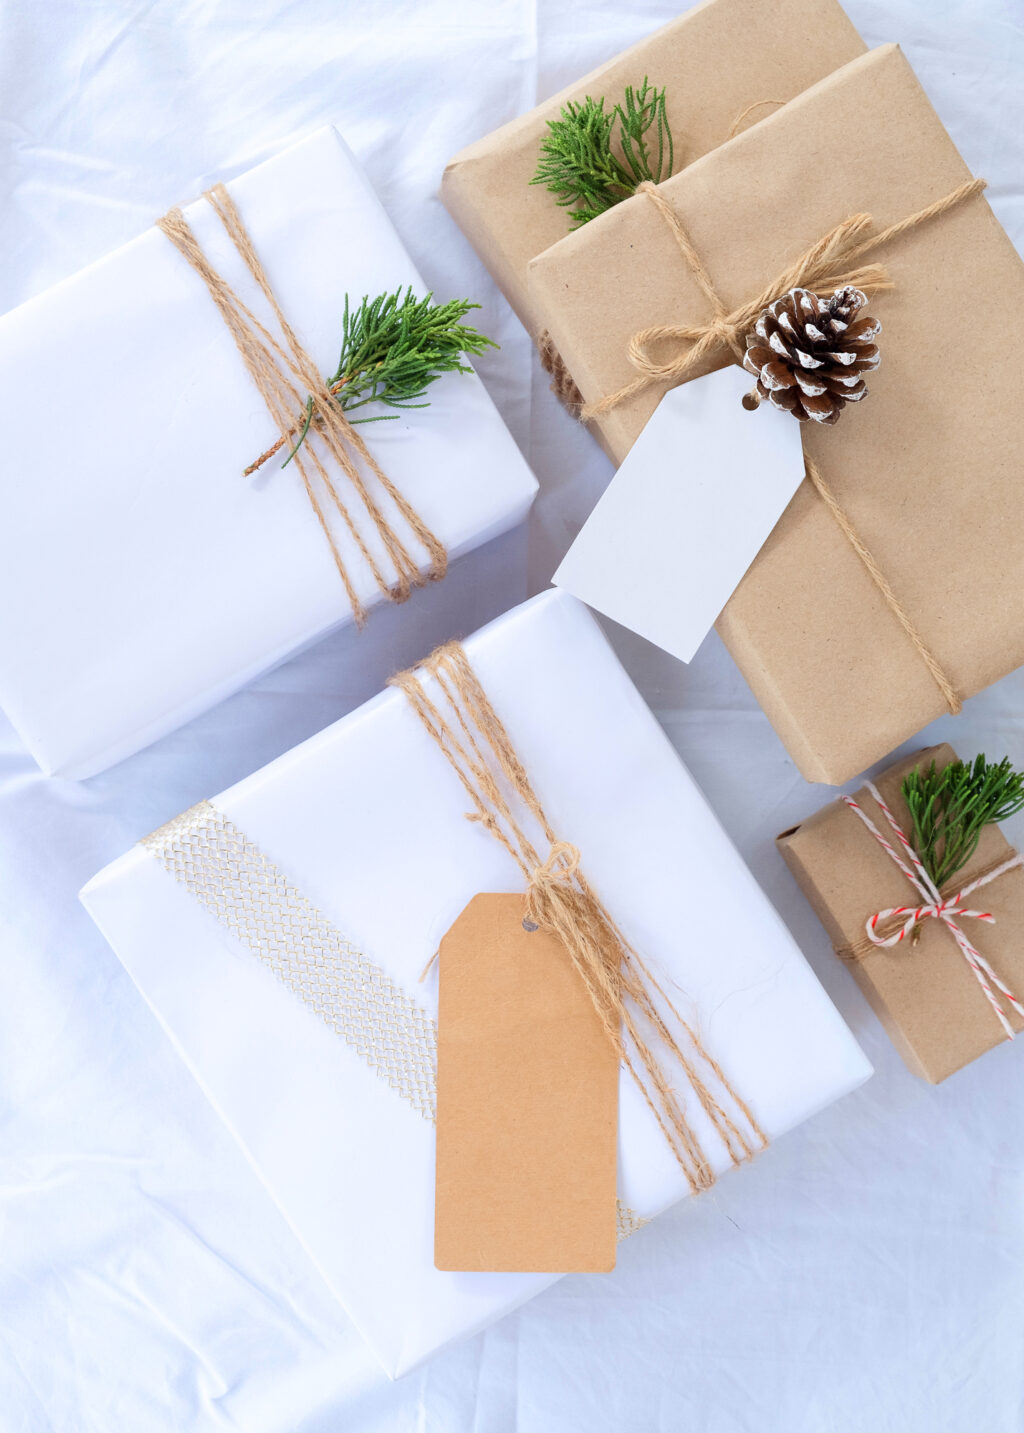 minimalist holiday gifts wrapped in natural wrapping paper